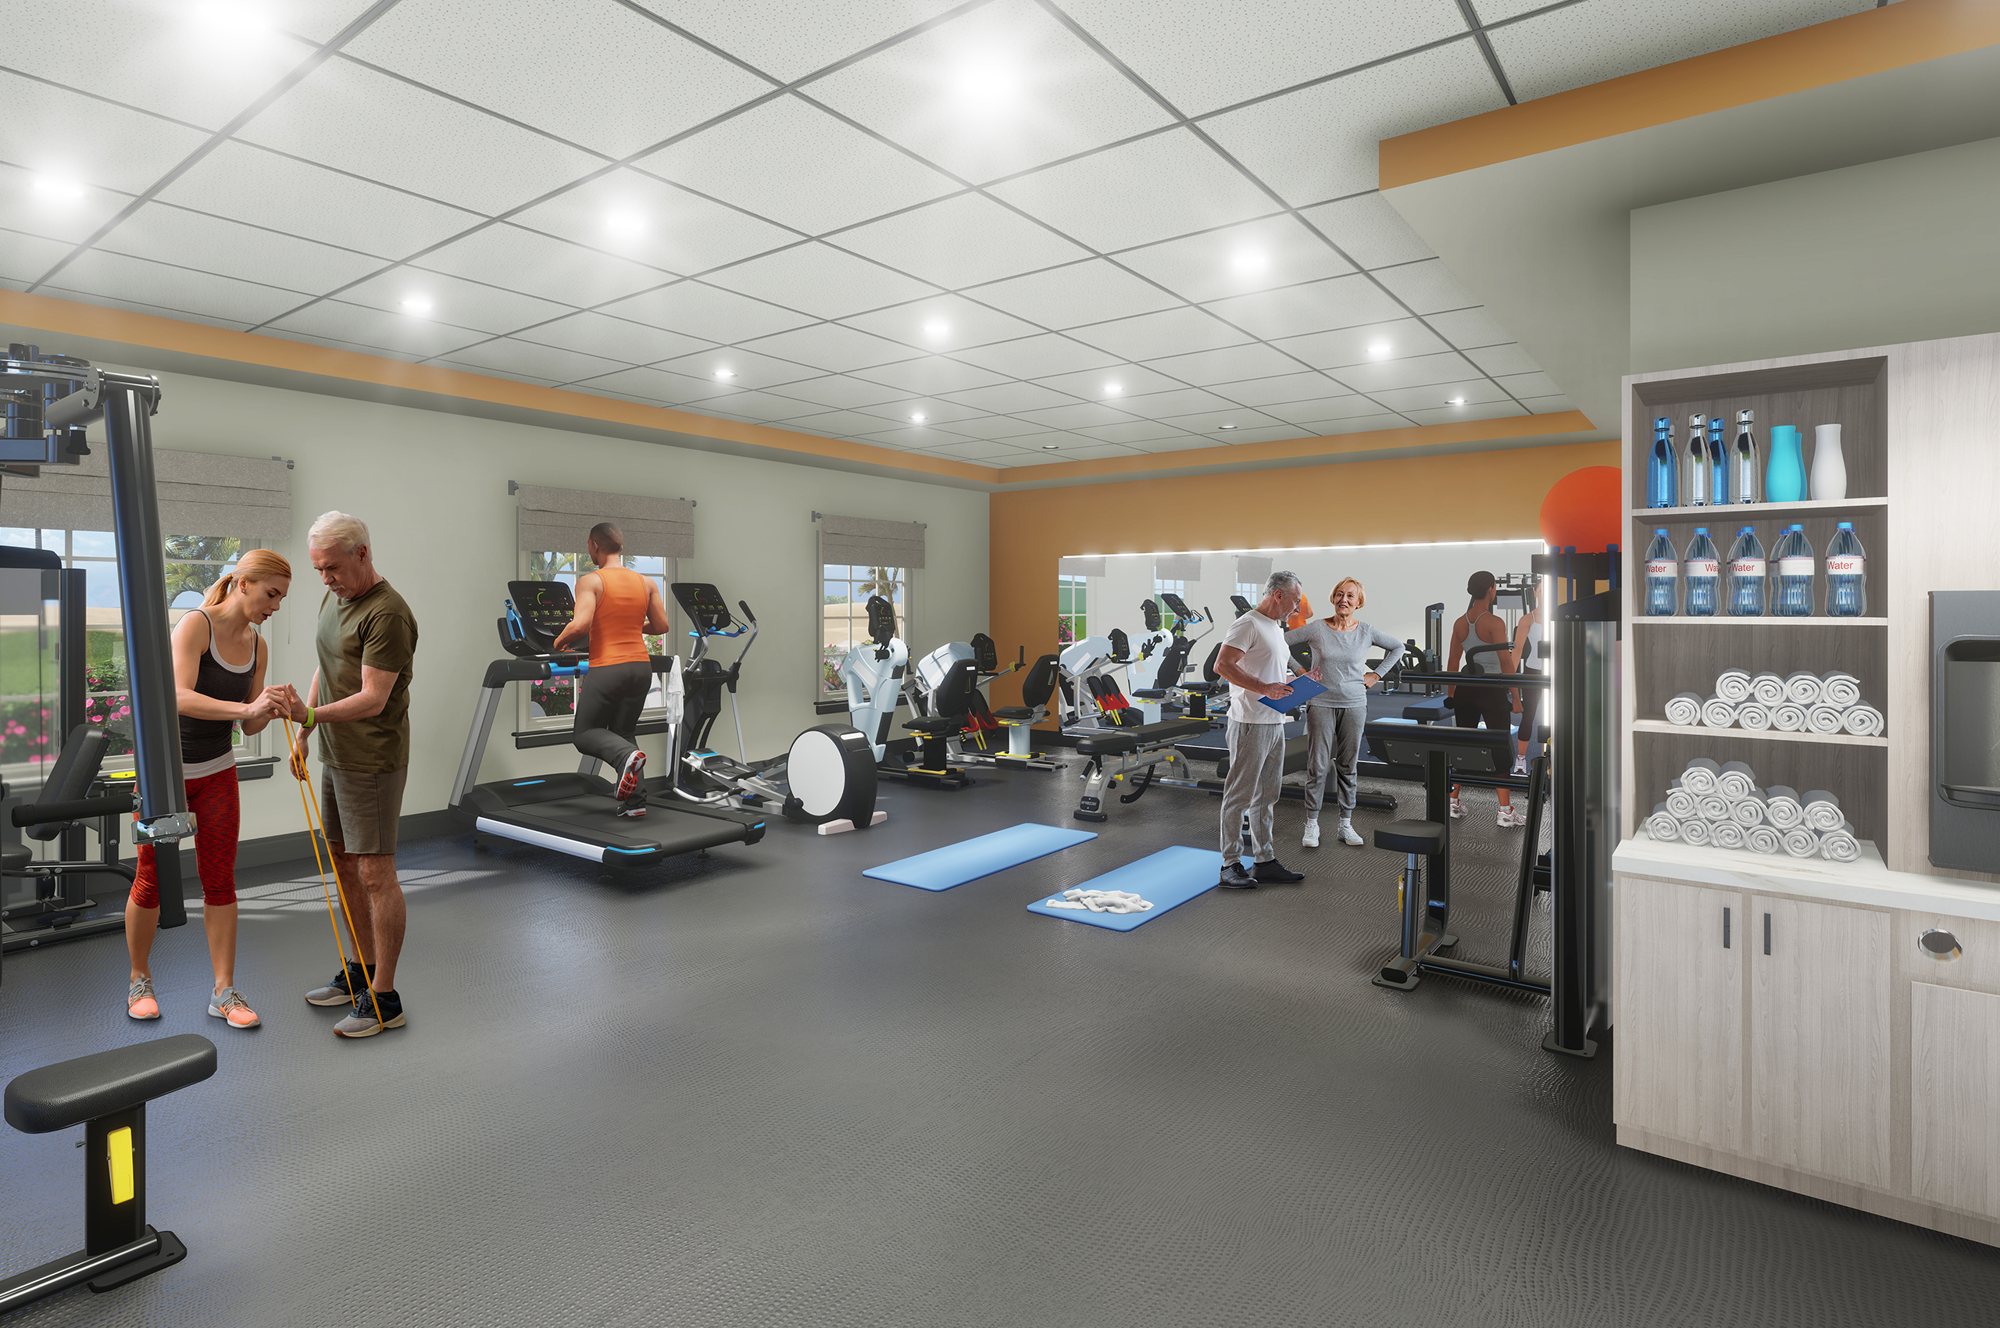 The fitness facility at Windsor Pointe.